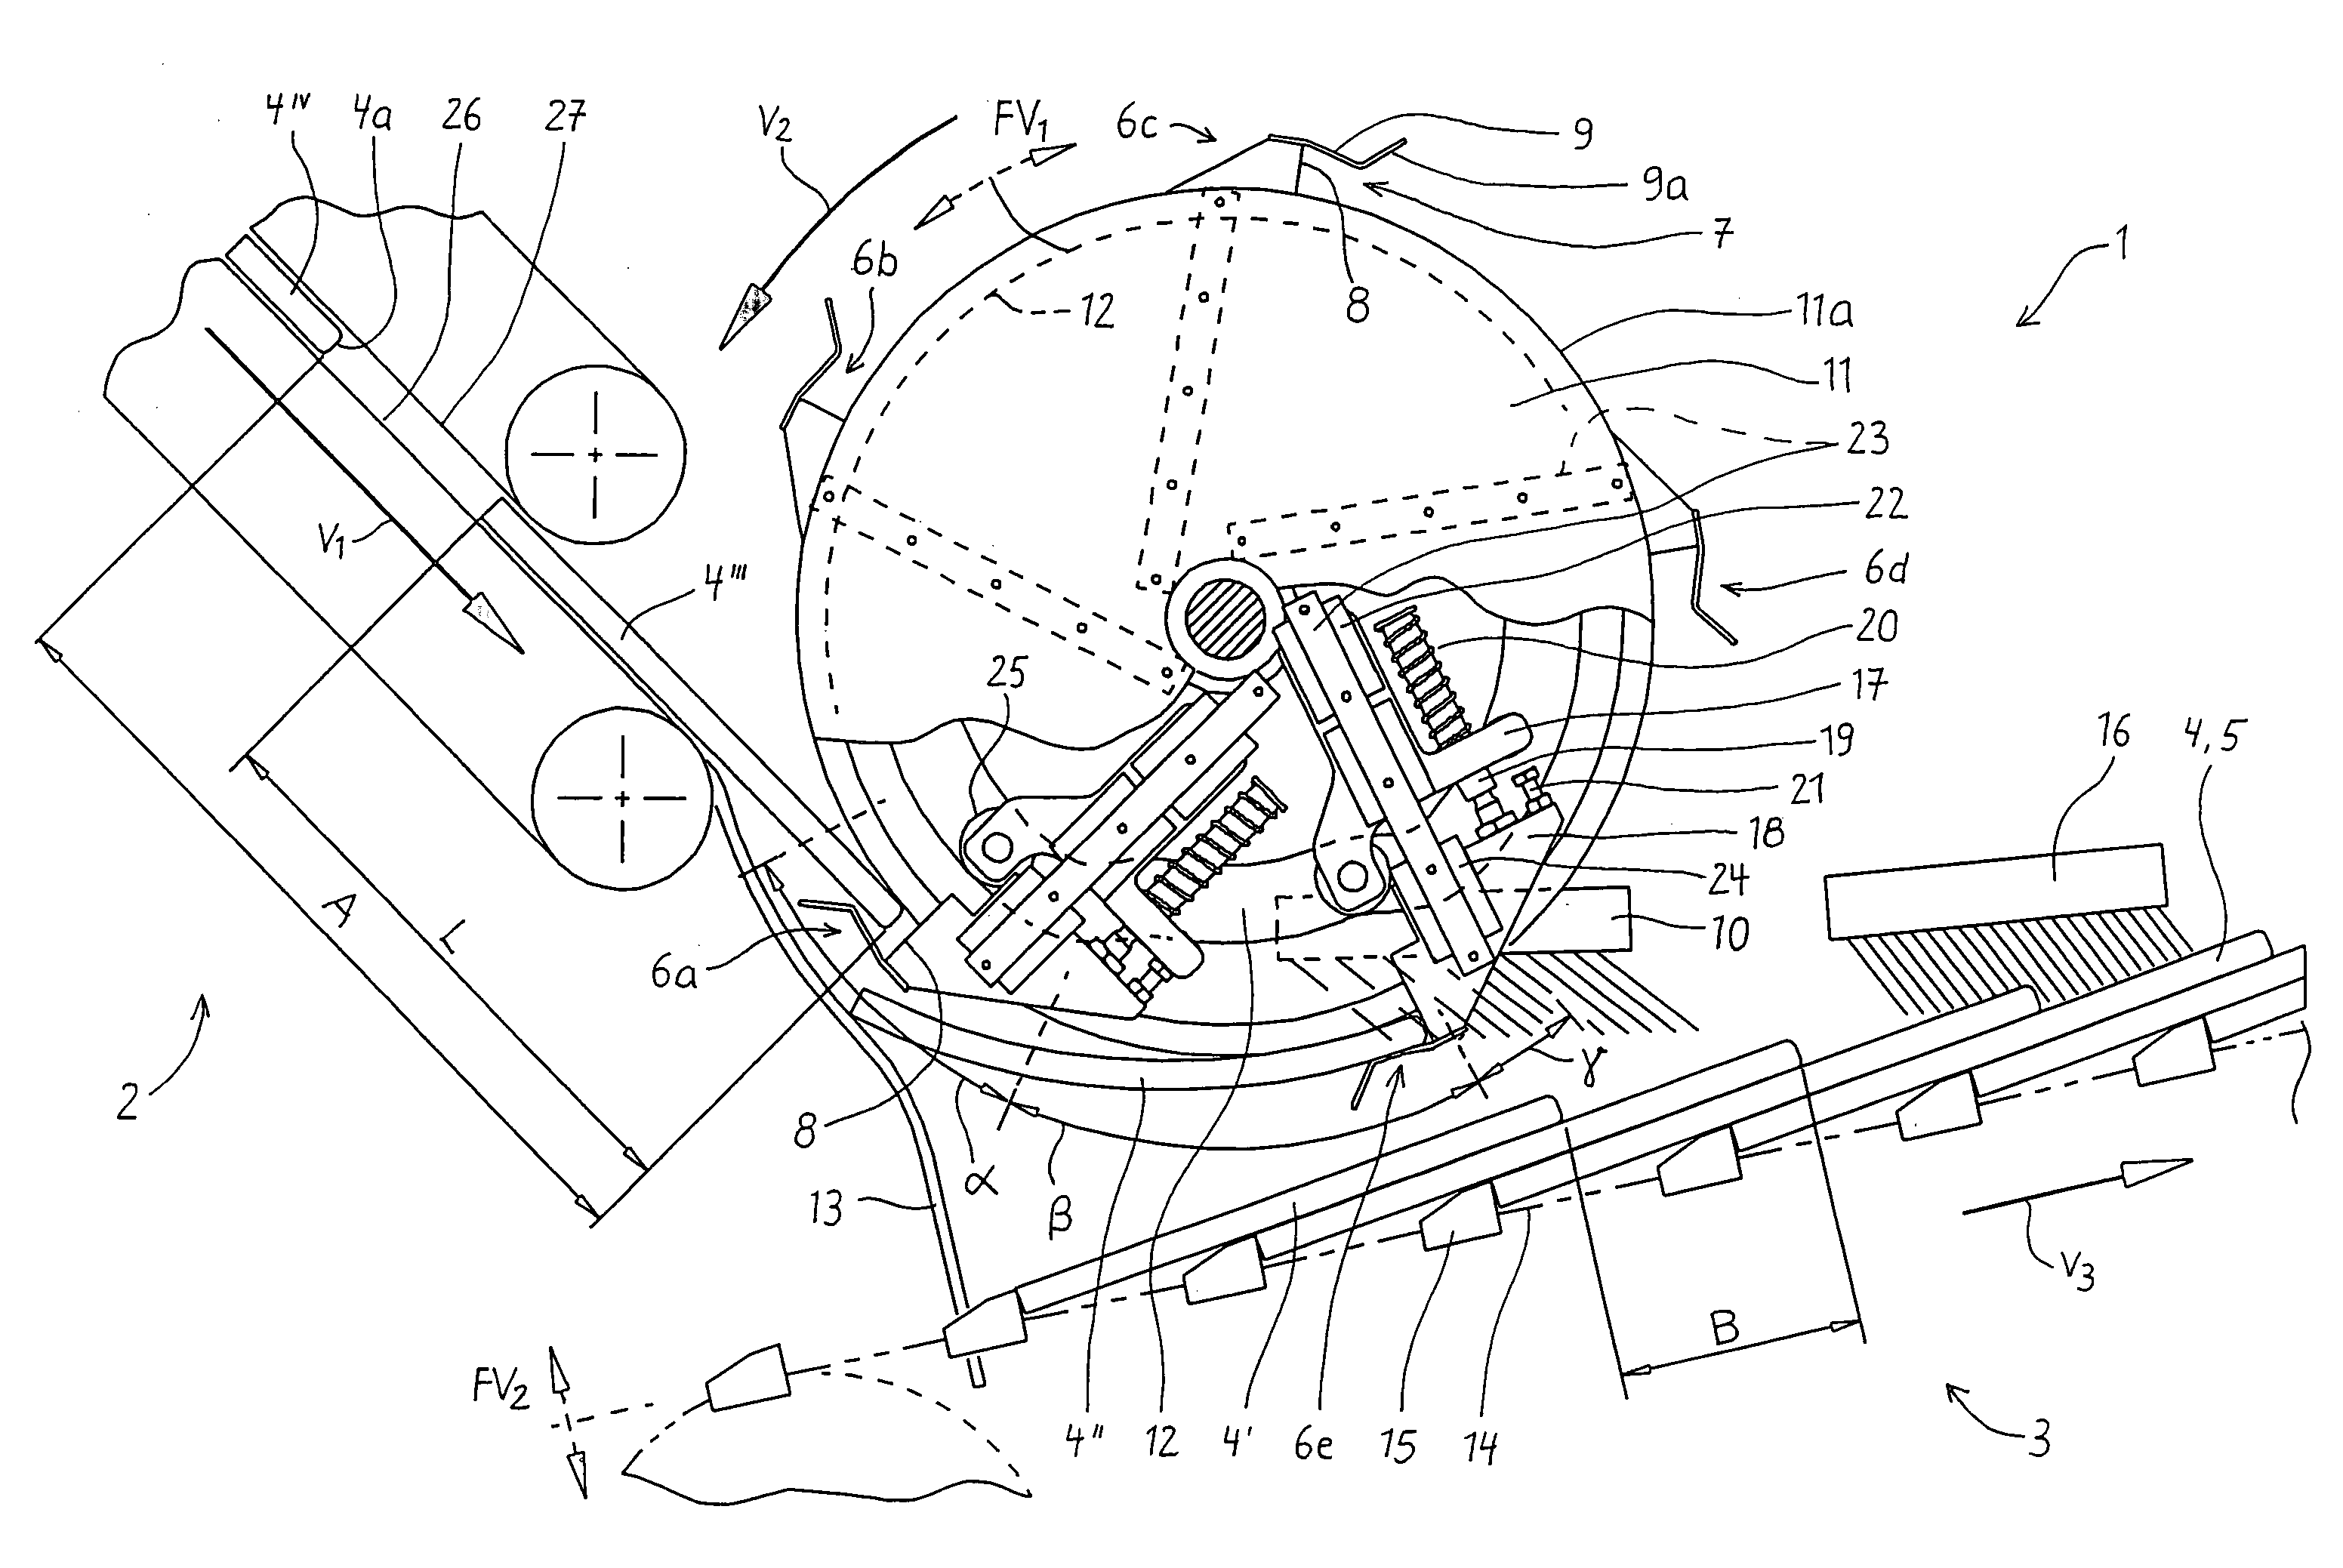 Device for depositing individual printed products, supplied in succession, in shingle formation